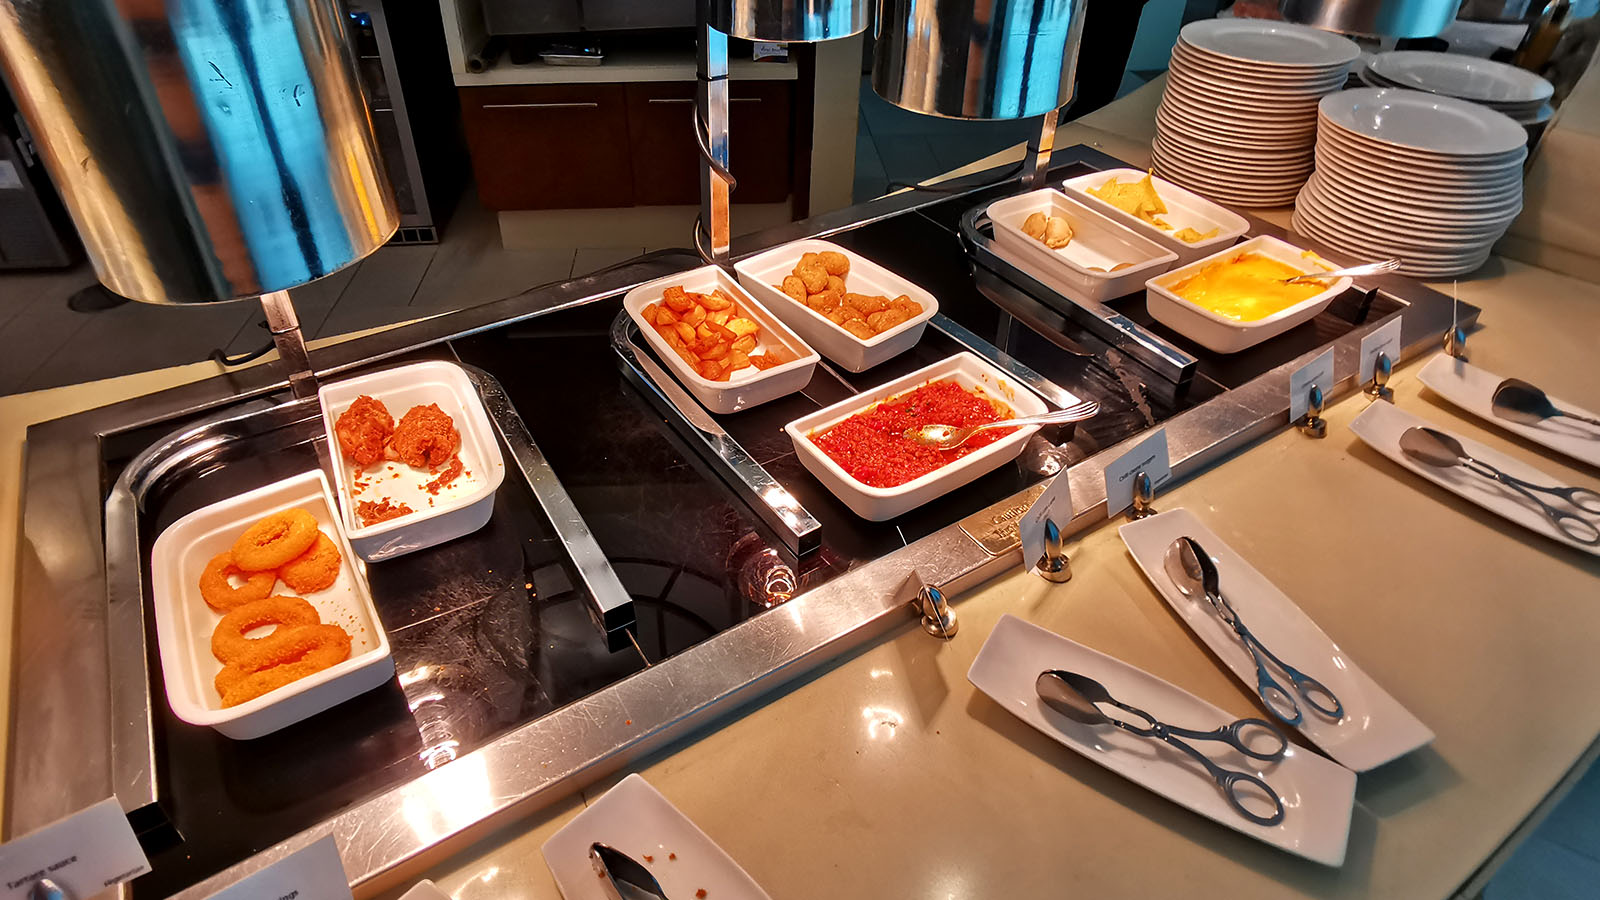 Meals in the Emirates Business Class Lounge, Dubai Concourse A